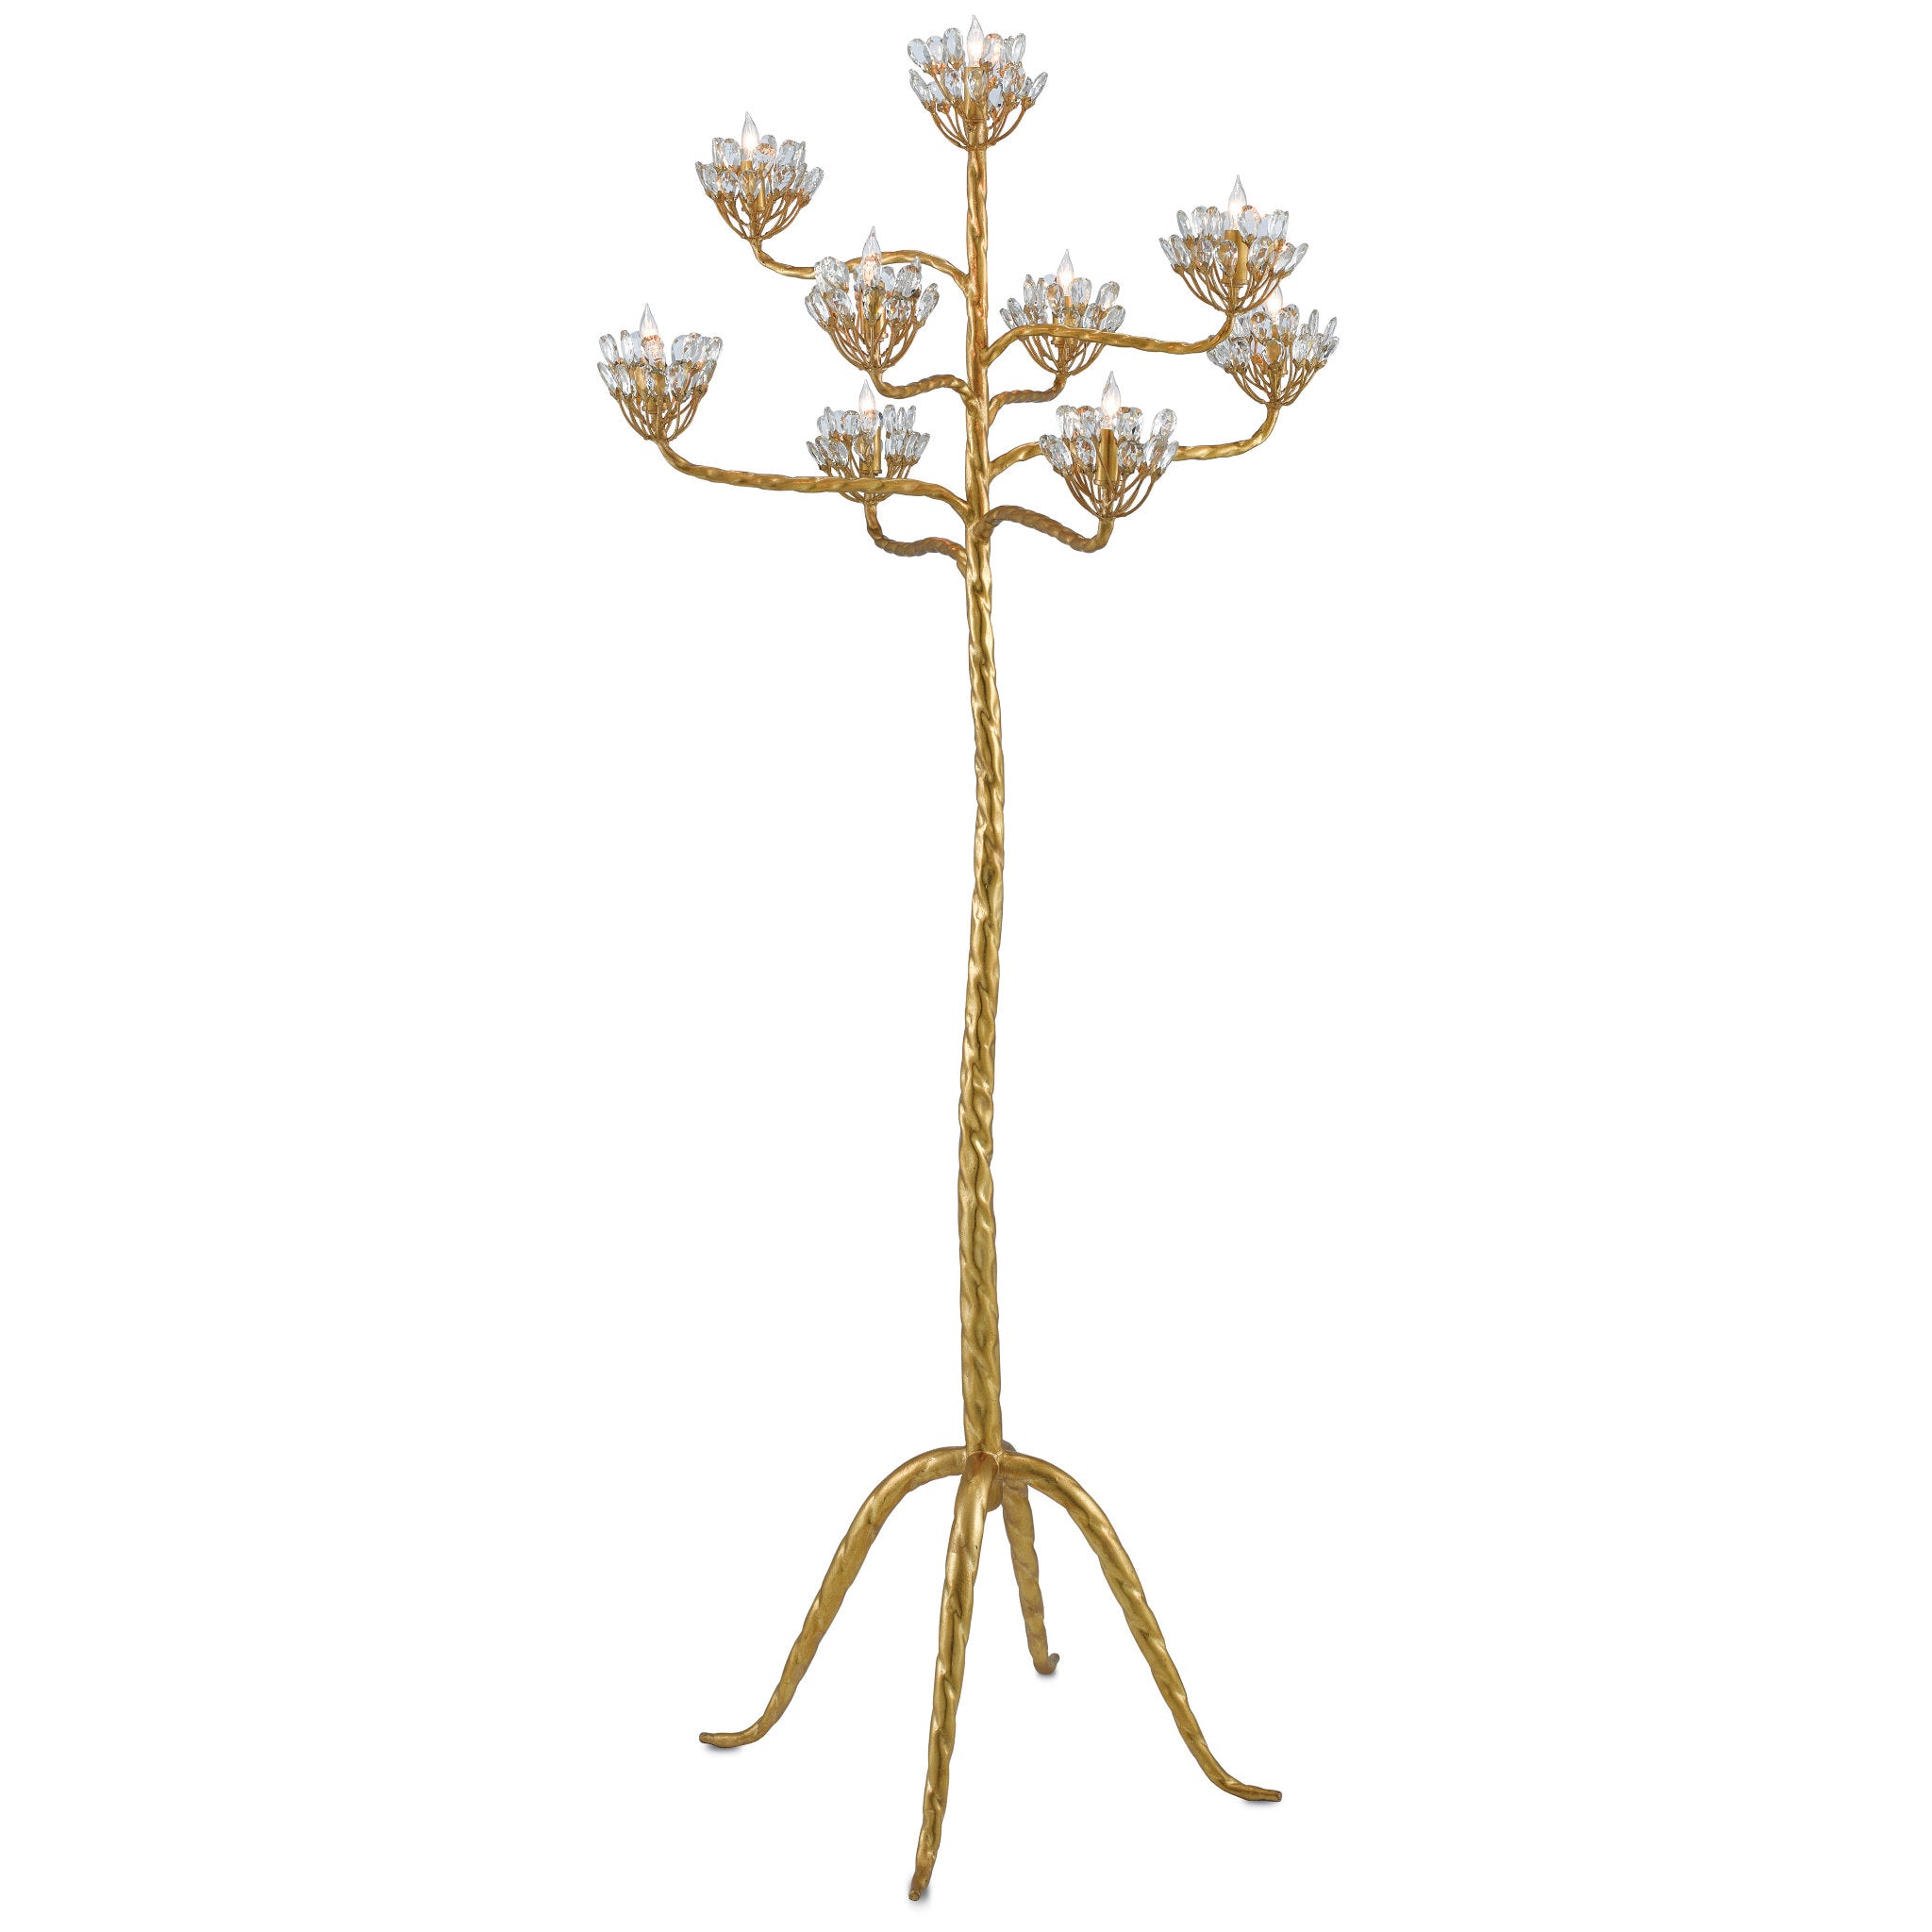 Agave Americana Gold Floor Lamp - Contemporary Gold Leaf